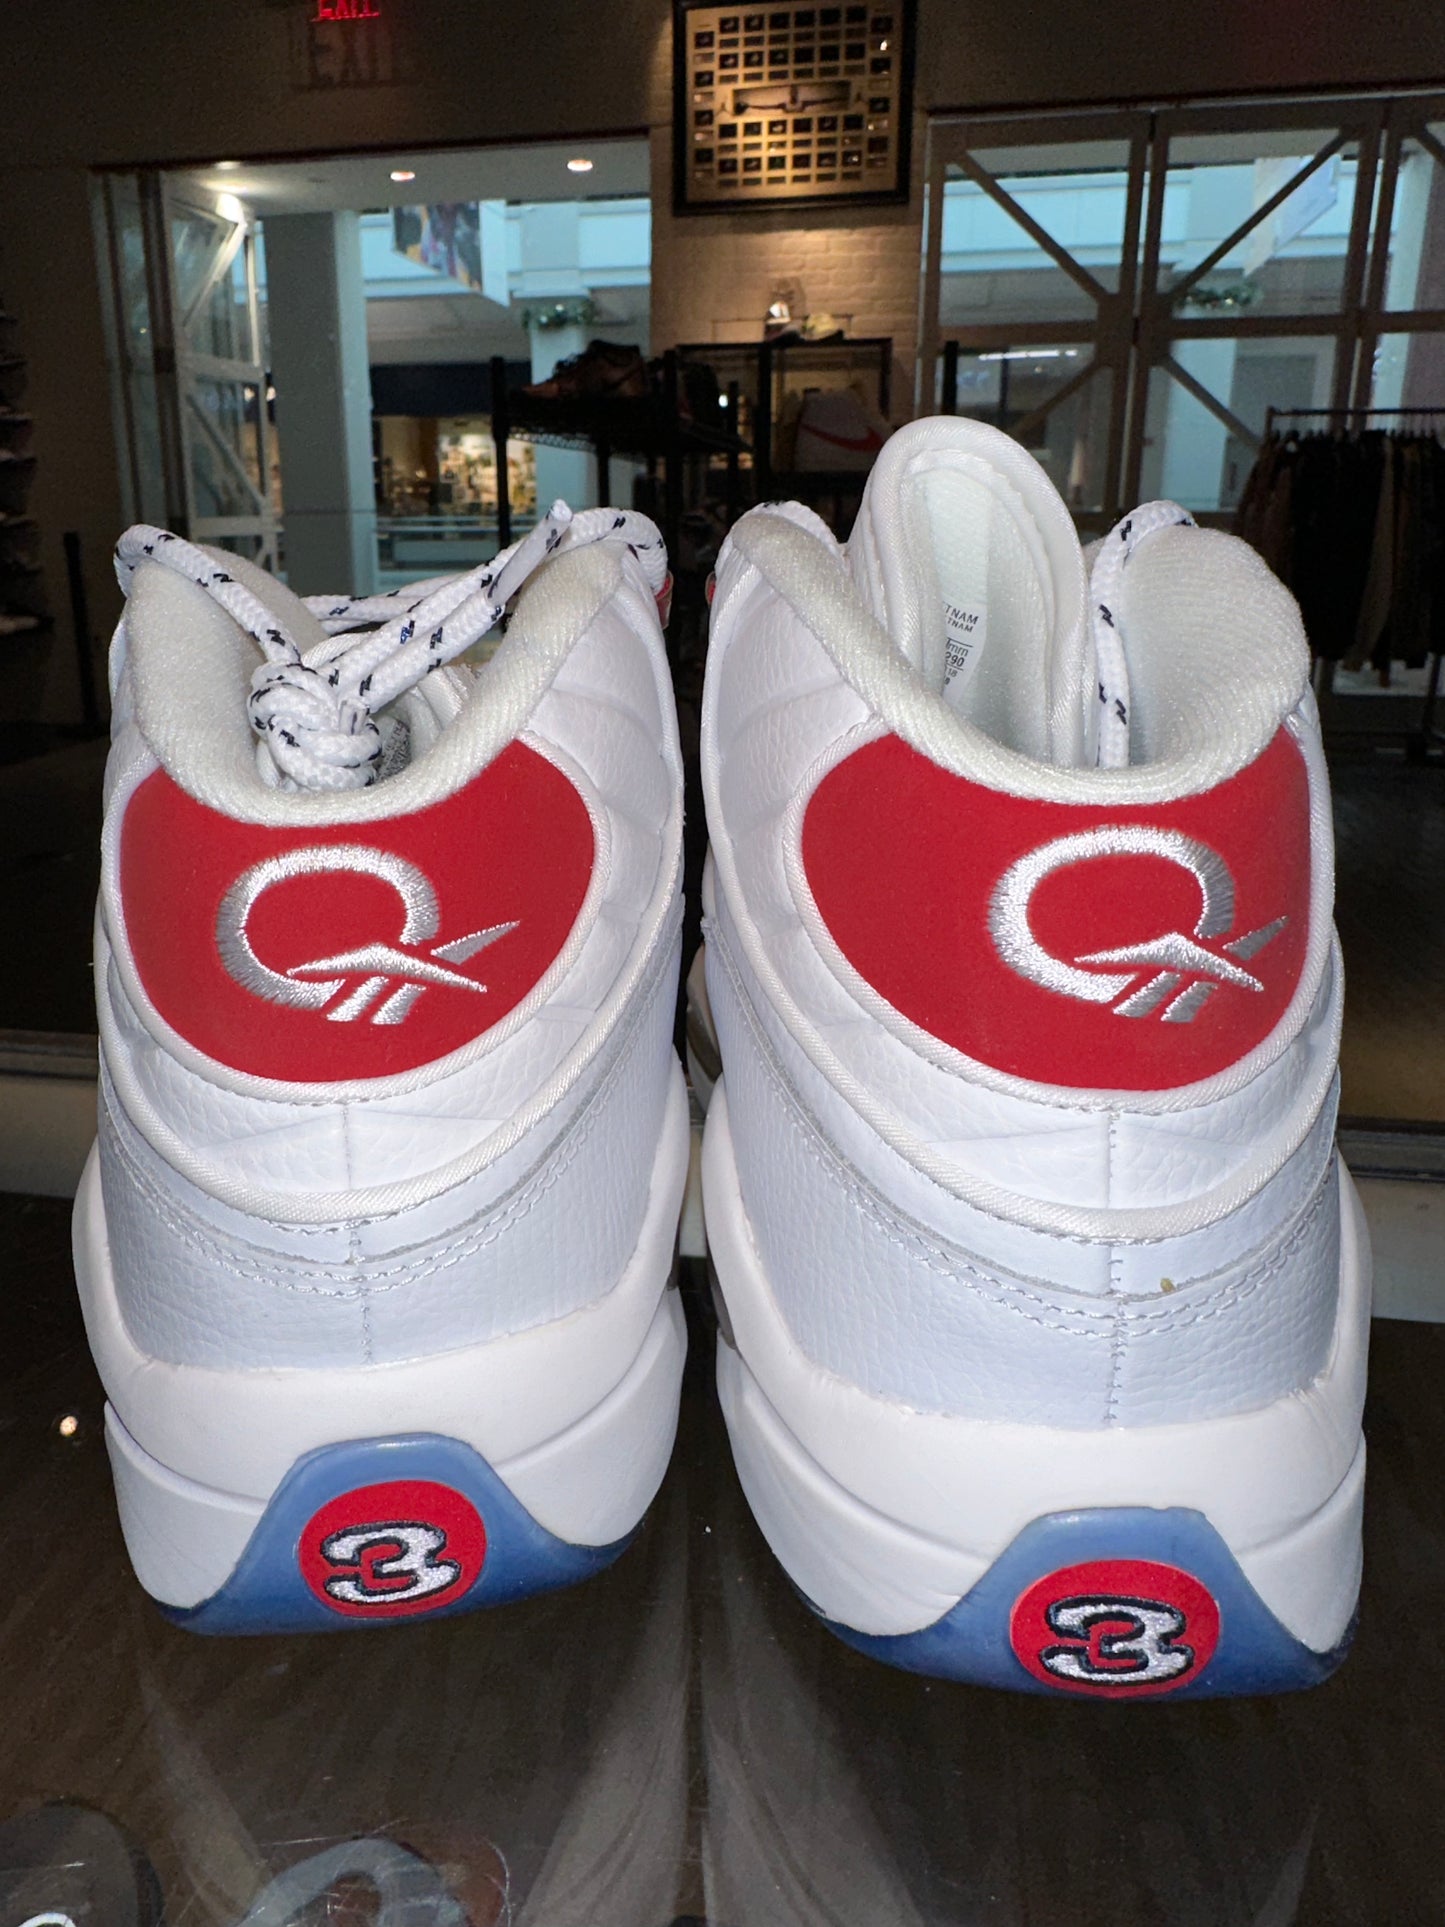 Size 11 Reebok Question Mid “Red Toe 25th Anniversary” Brand New (Mall)